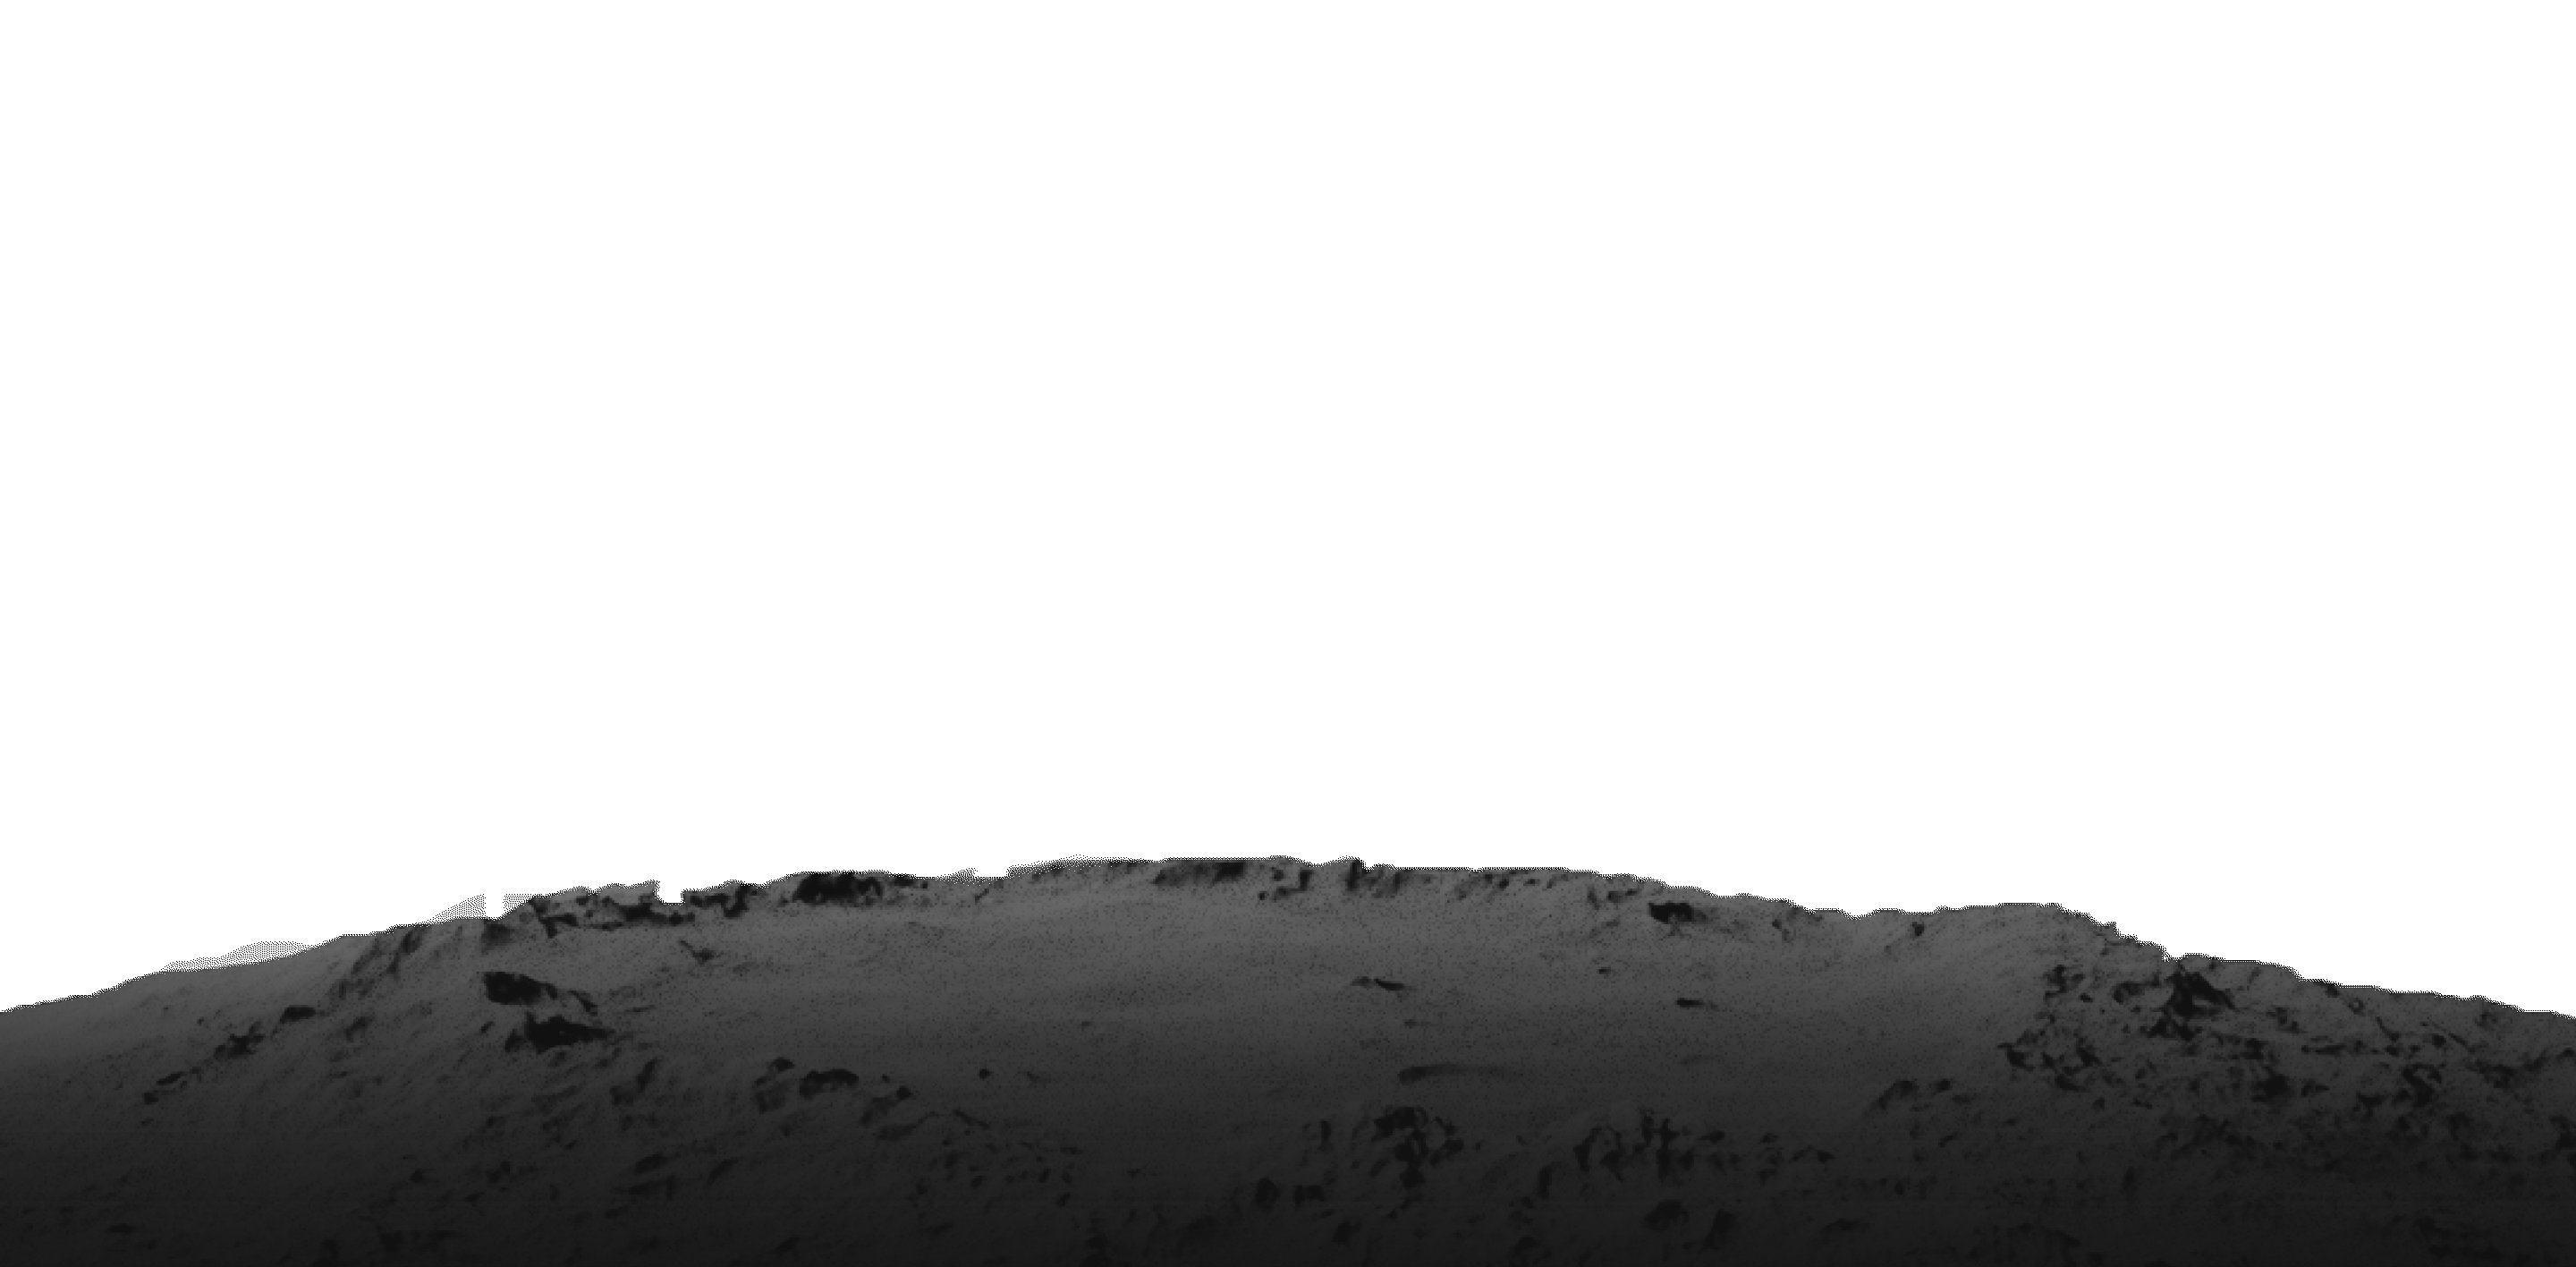 The surface of the moon